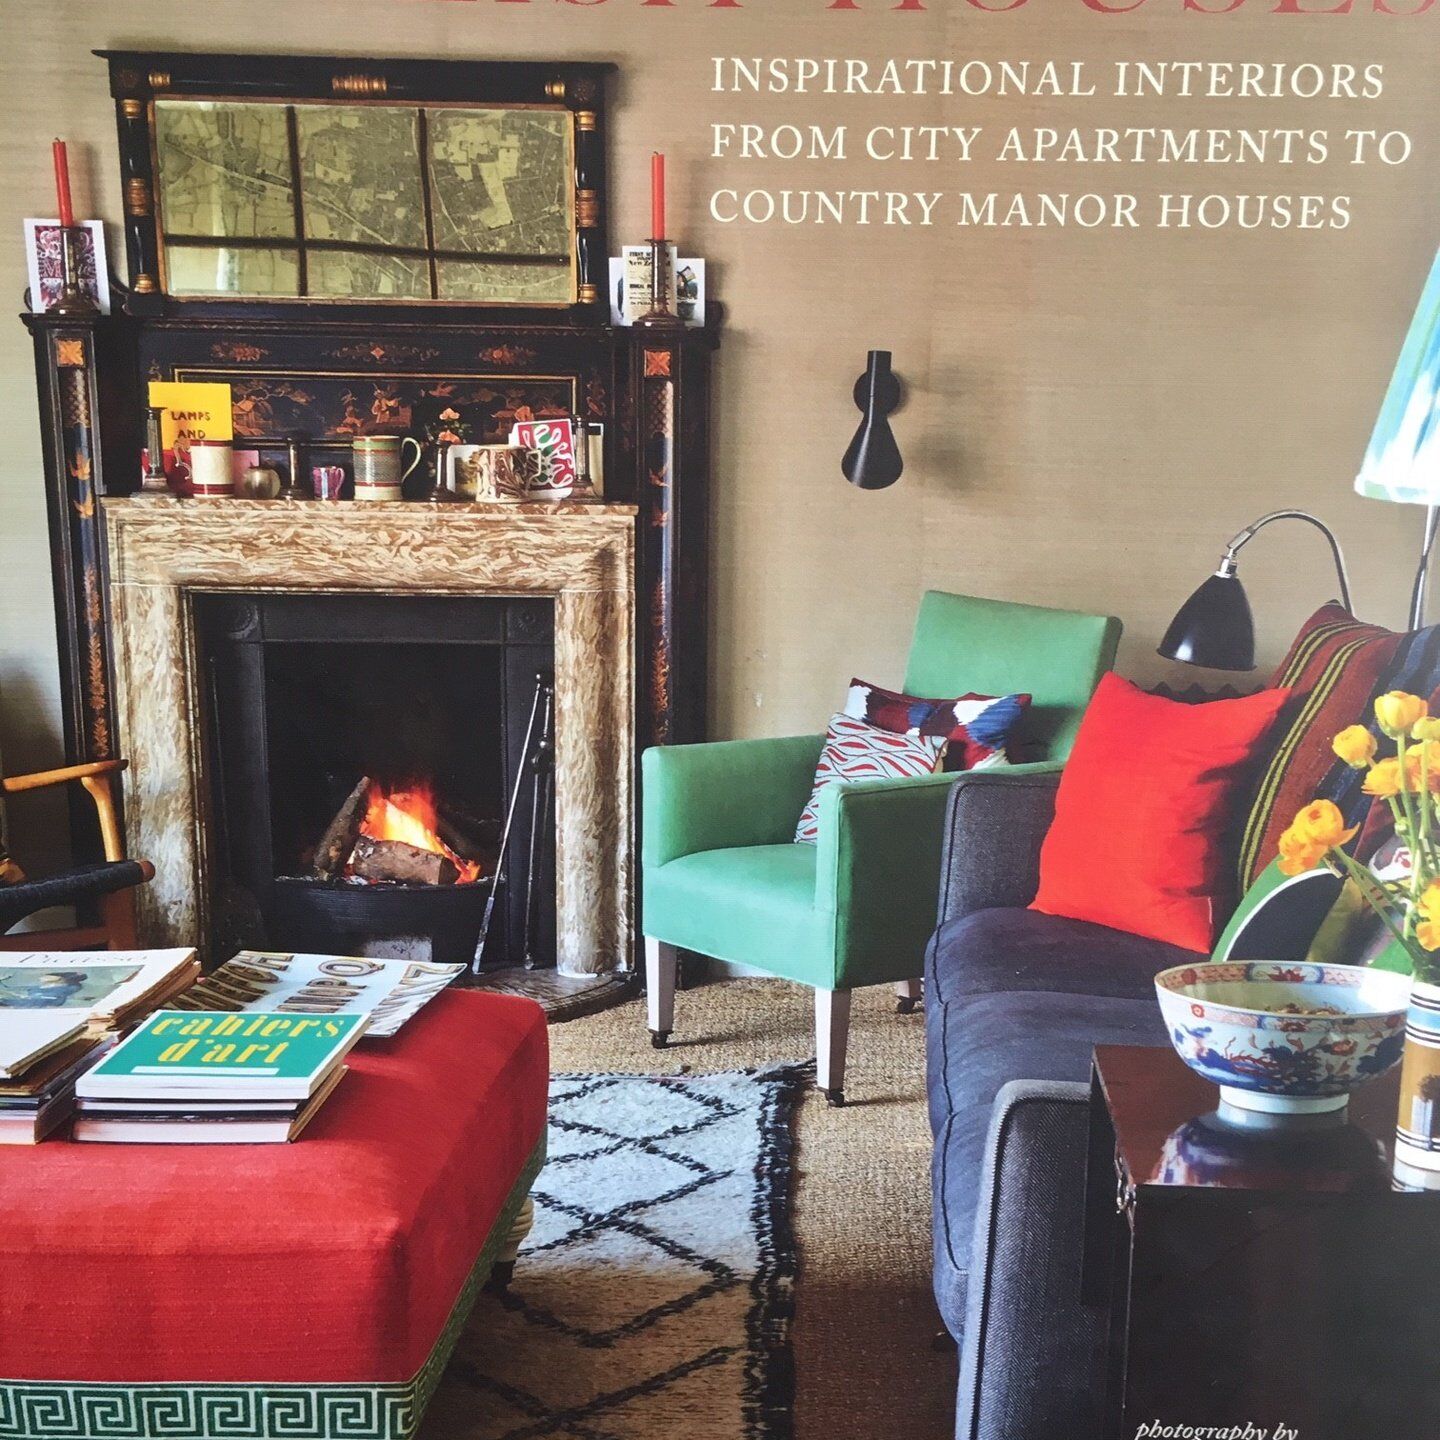 Book: English Houses-Inspirational Interiors from City Apartments to Country Manor Houses